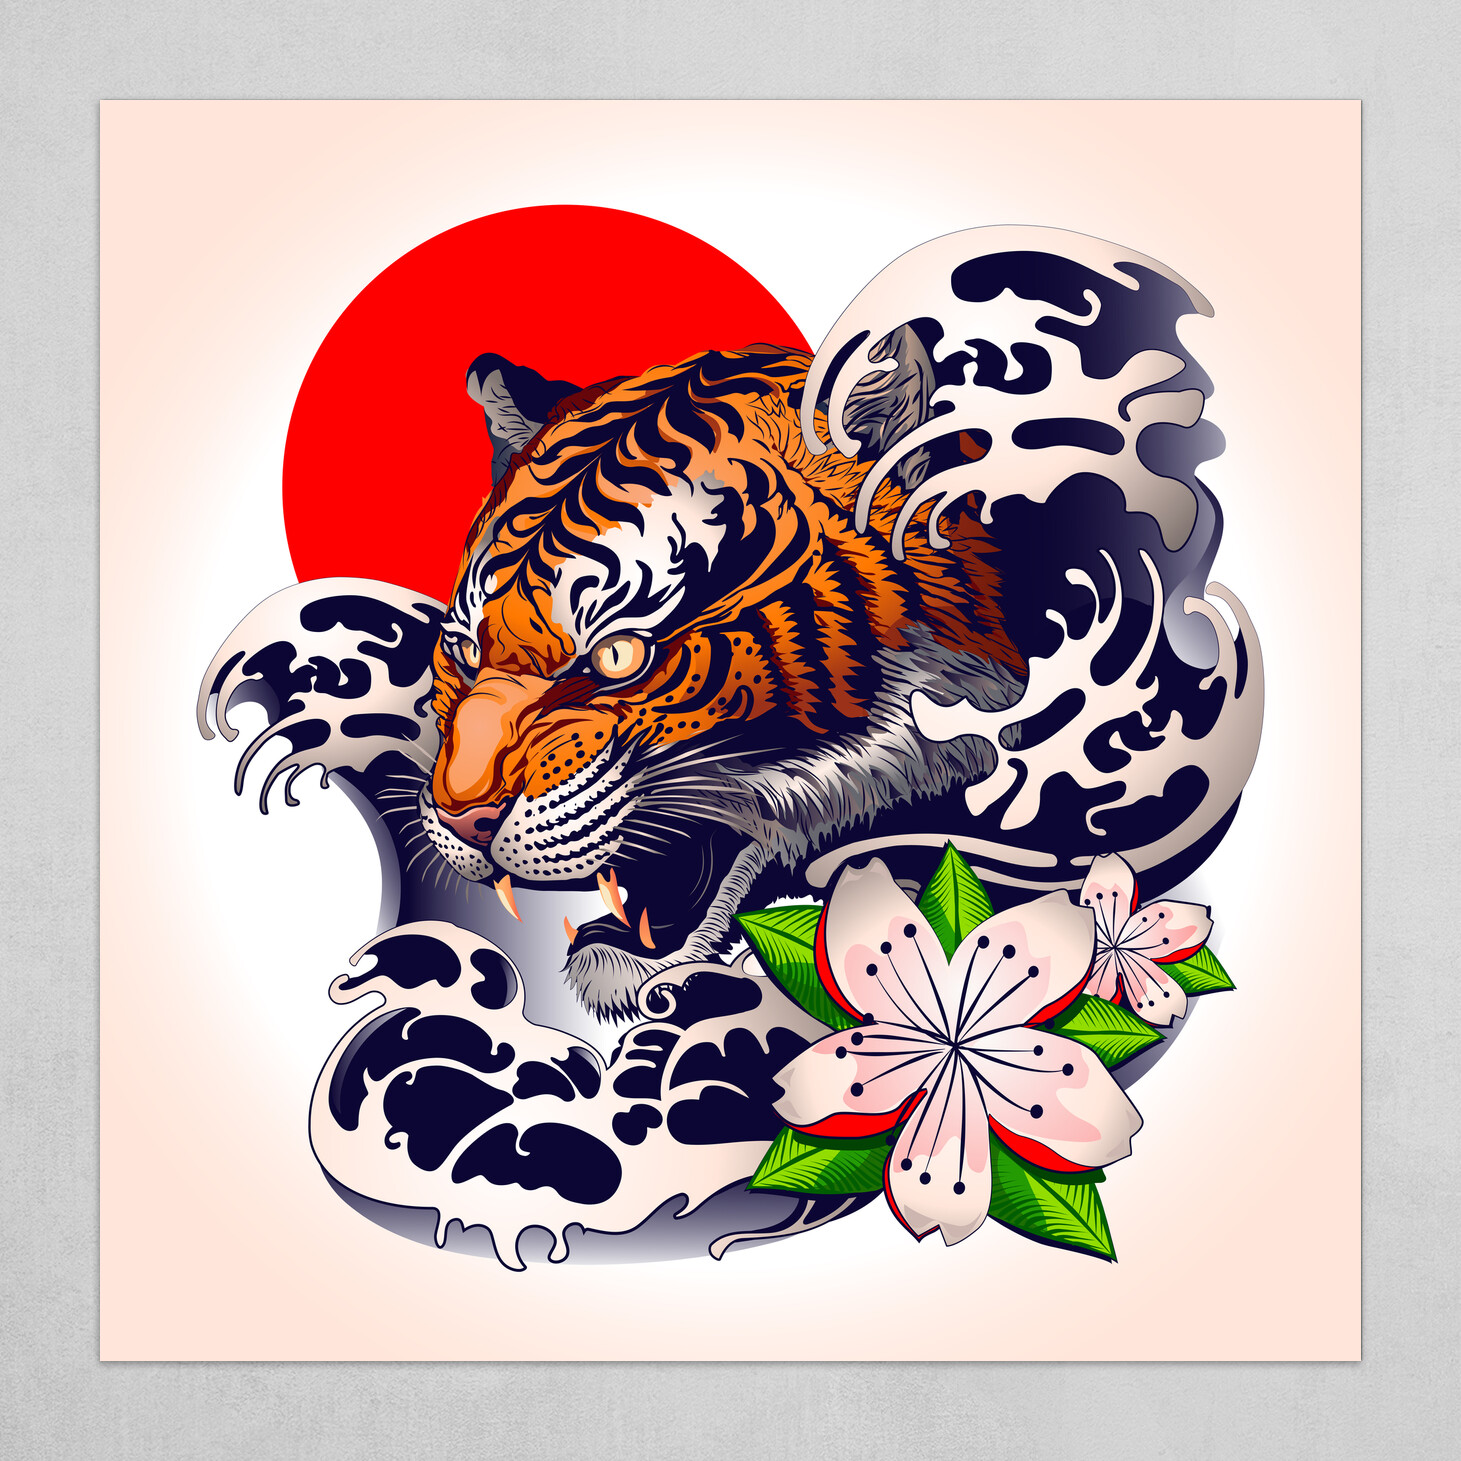 What Does Japanese Tiger Tattoo Mean  Represent Symbolism